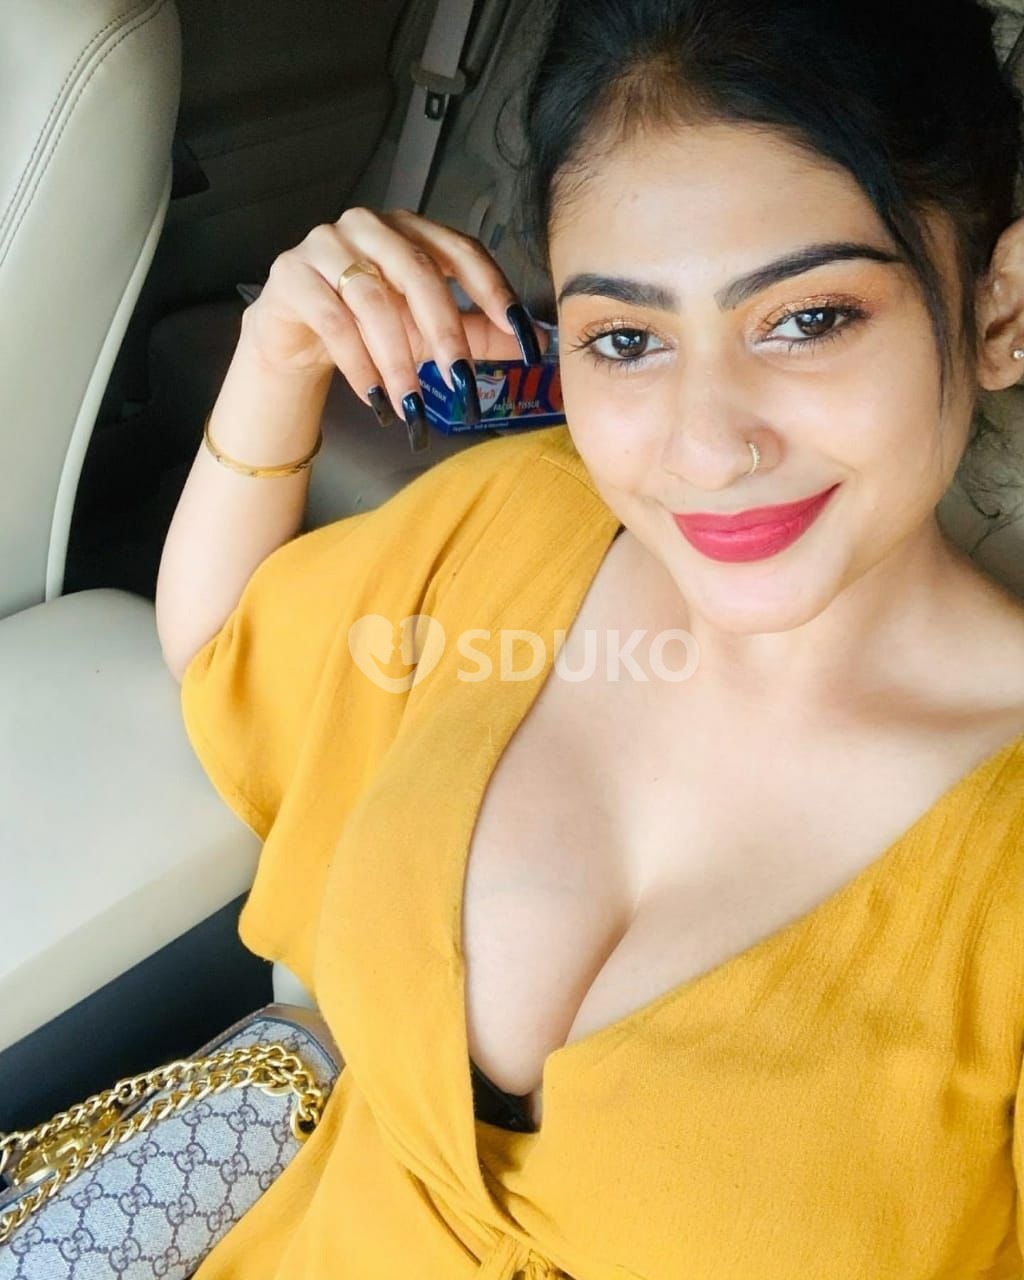 Dum dum 92564/71656 now availabcall girl service available with hotel room full safe and secure without condom sucking k